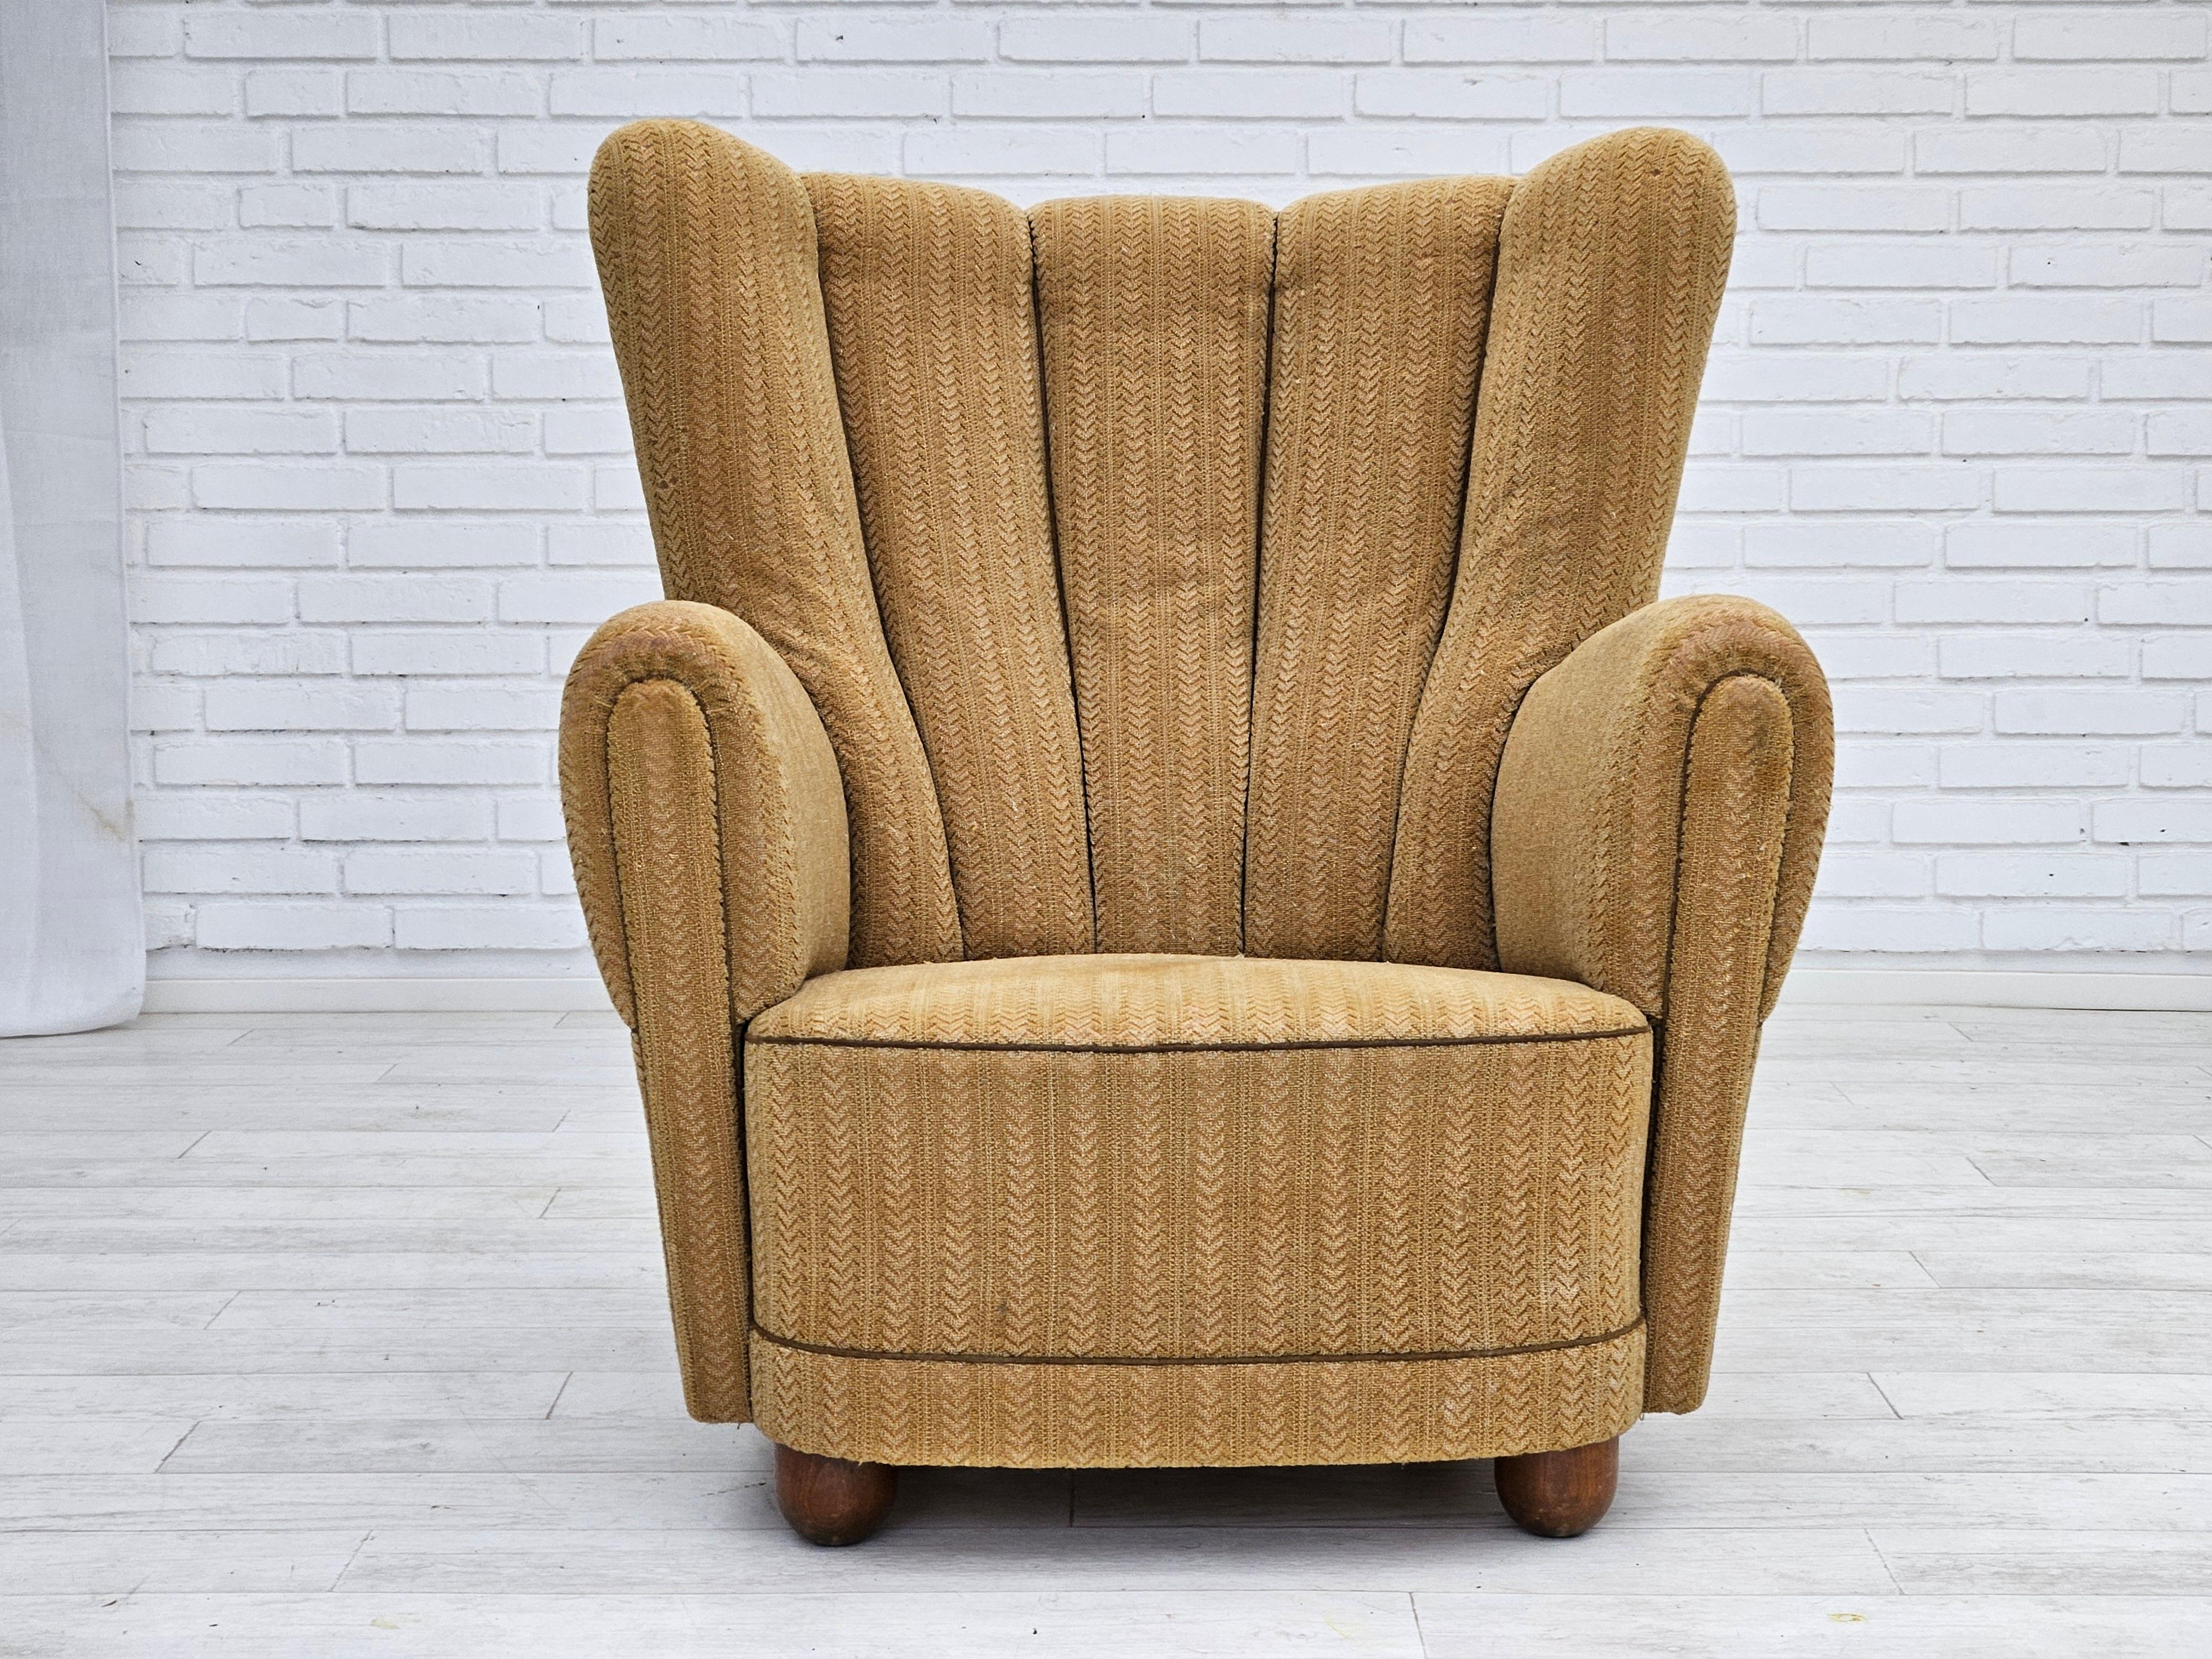 1960s, Danish relax chair in original good condition. No smells and no stains, small abrasion of the fabric on the lower back part. Honey colour, cotton/wool fabric. Brass springs in the seat. Oak wood legs. Manufactured by Danish furniture